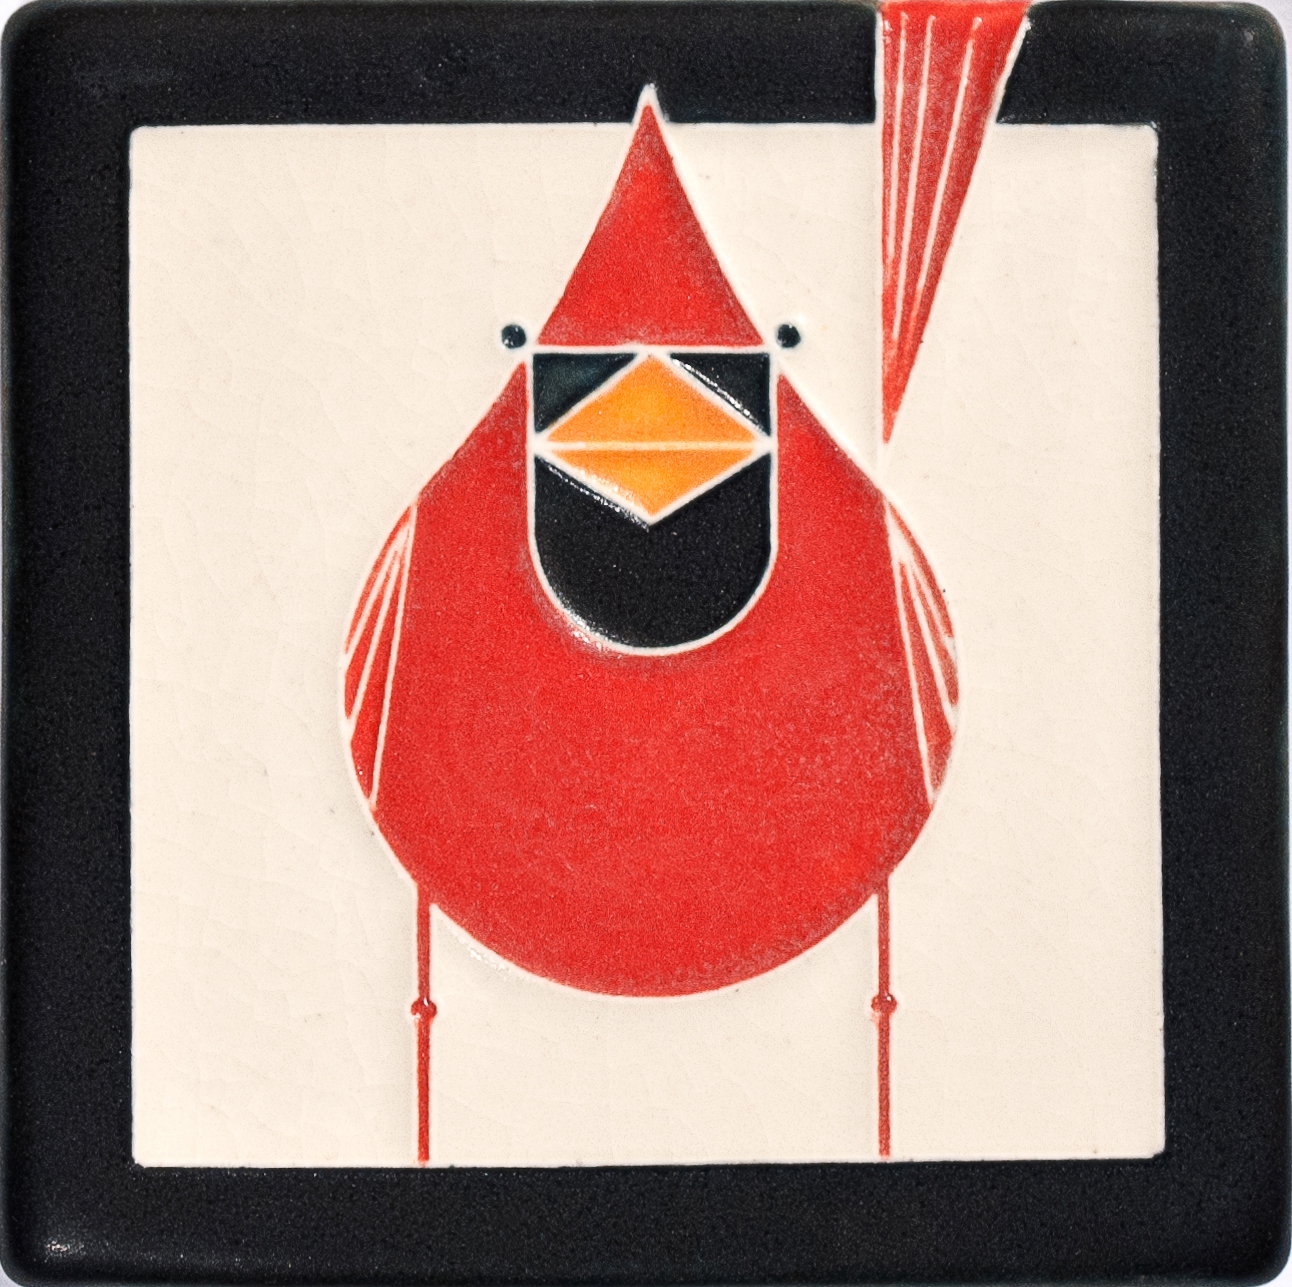 An art tile of a male cardinal designed by the American modernist artist Charley Harper from the Frank Lloyd Wright collection.